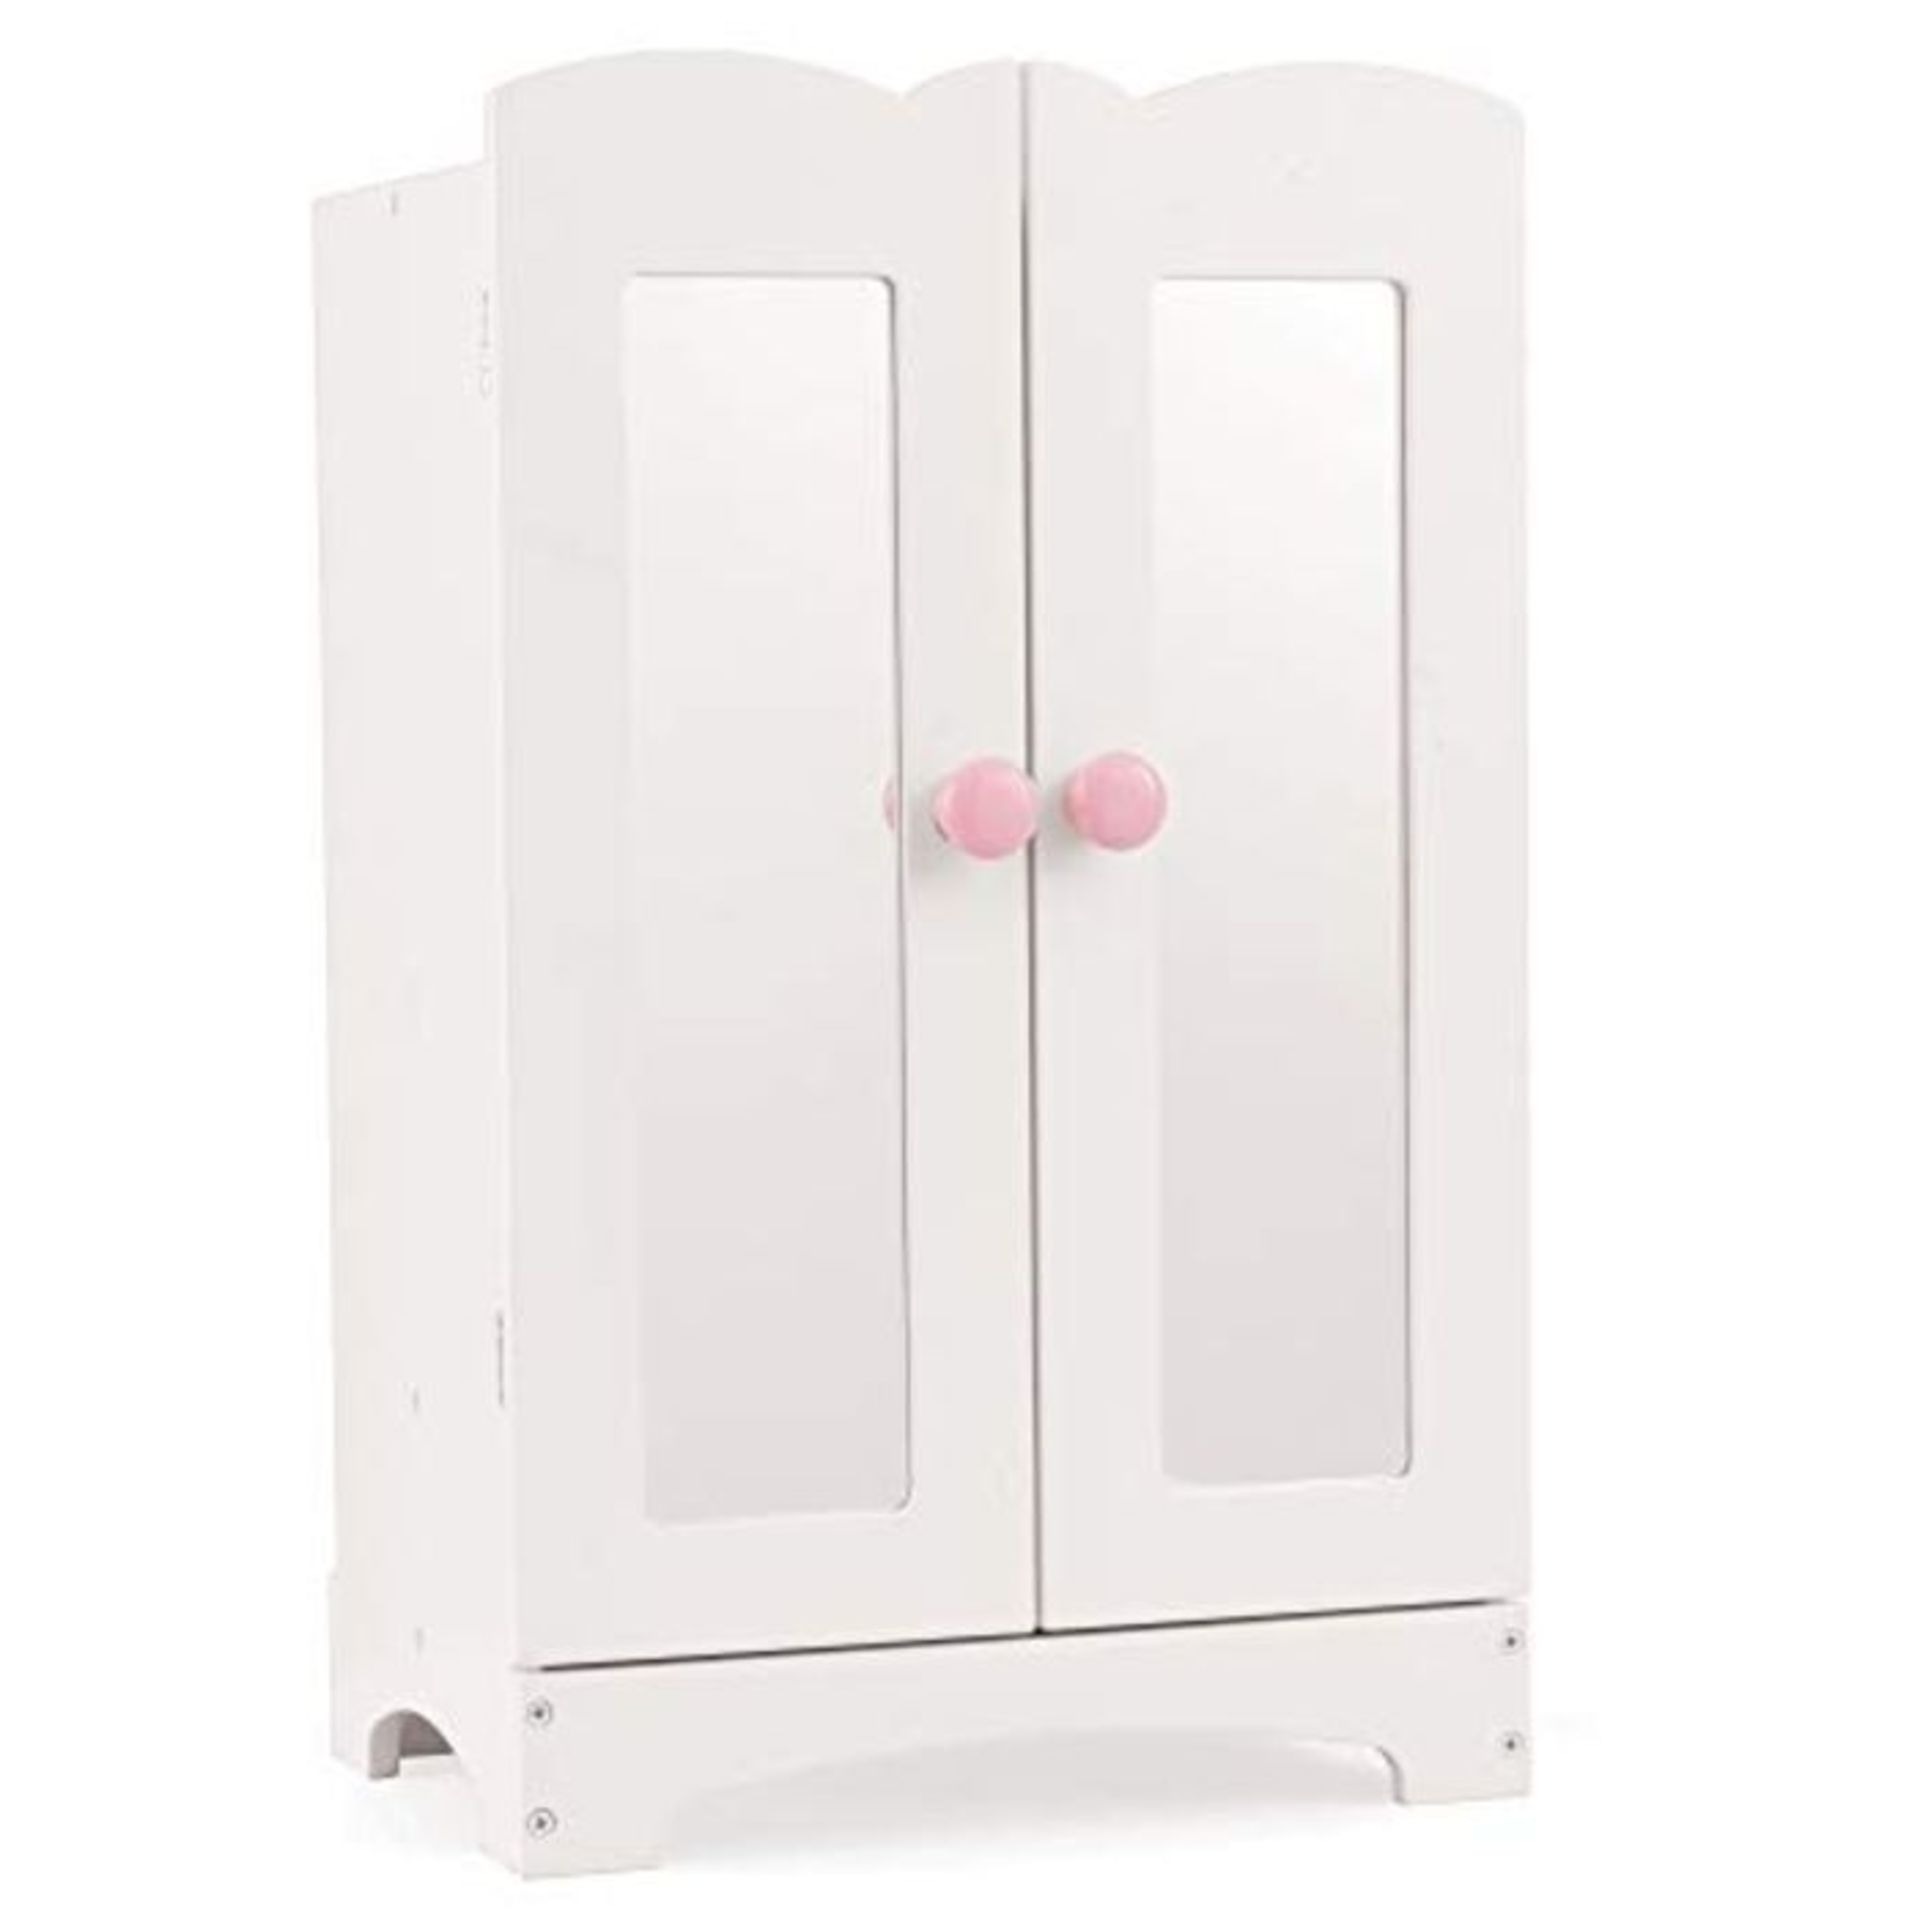 KidKraft 60132 Lil' Doll Armoire Wooden Closet with Clothes Hangers, Bedroom Furniture